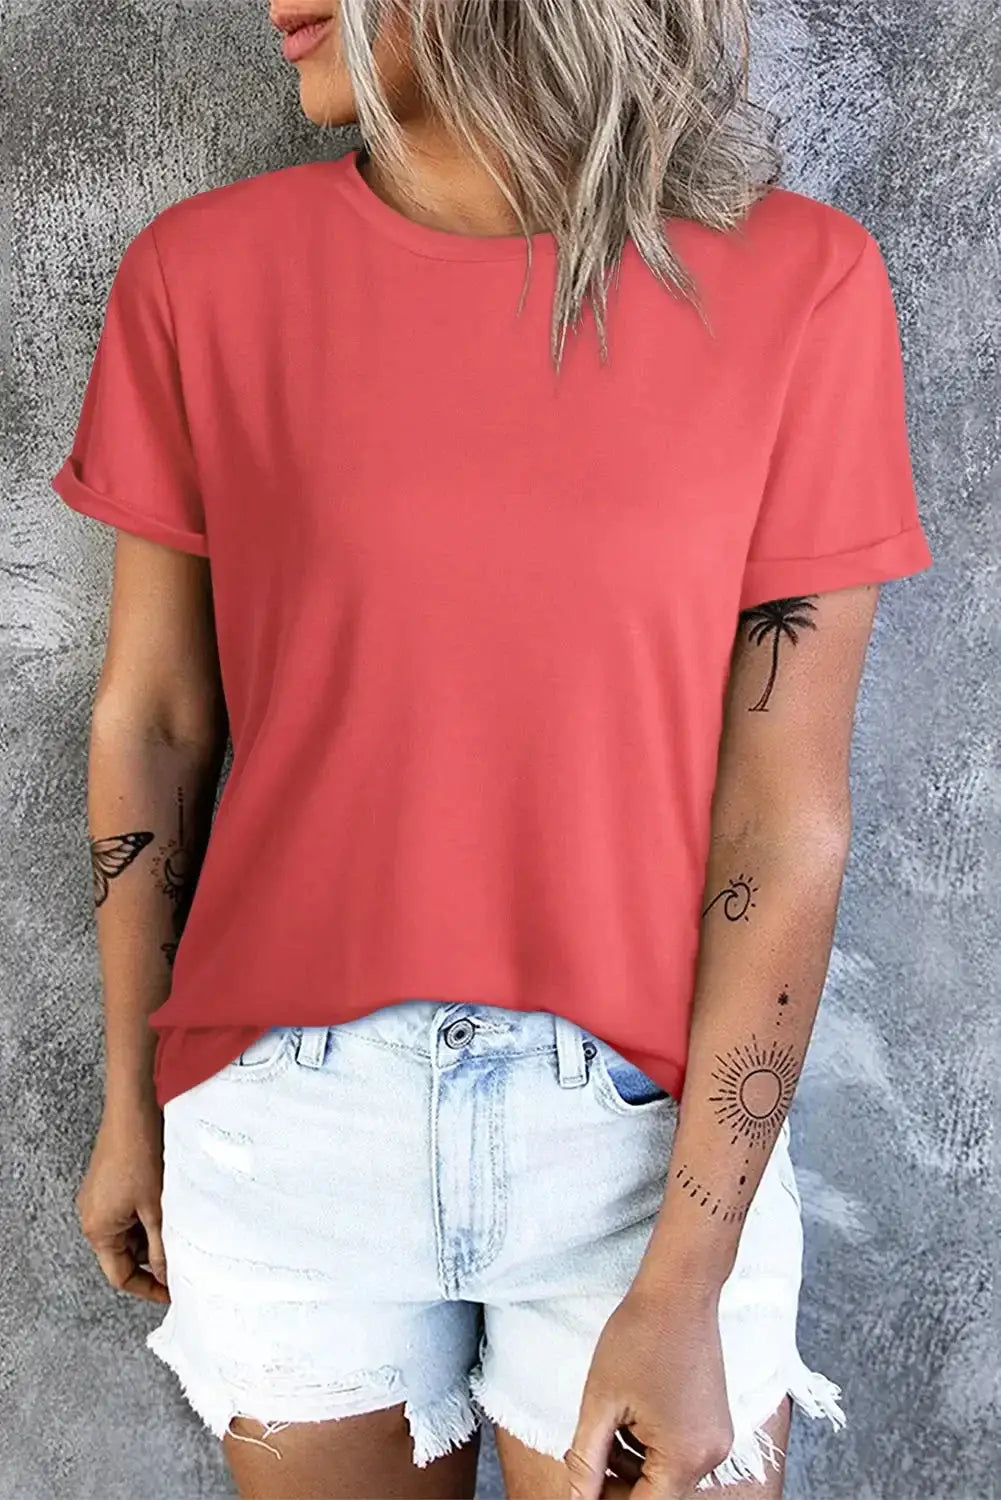 Red solid color crew neck tee - s / 95% polyester + 5% elastane - t-shirts